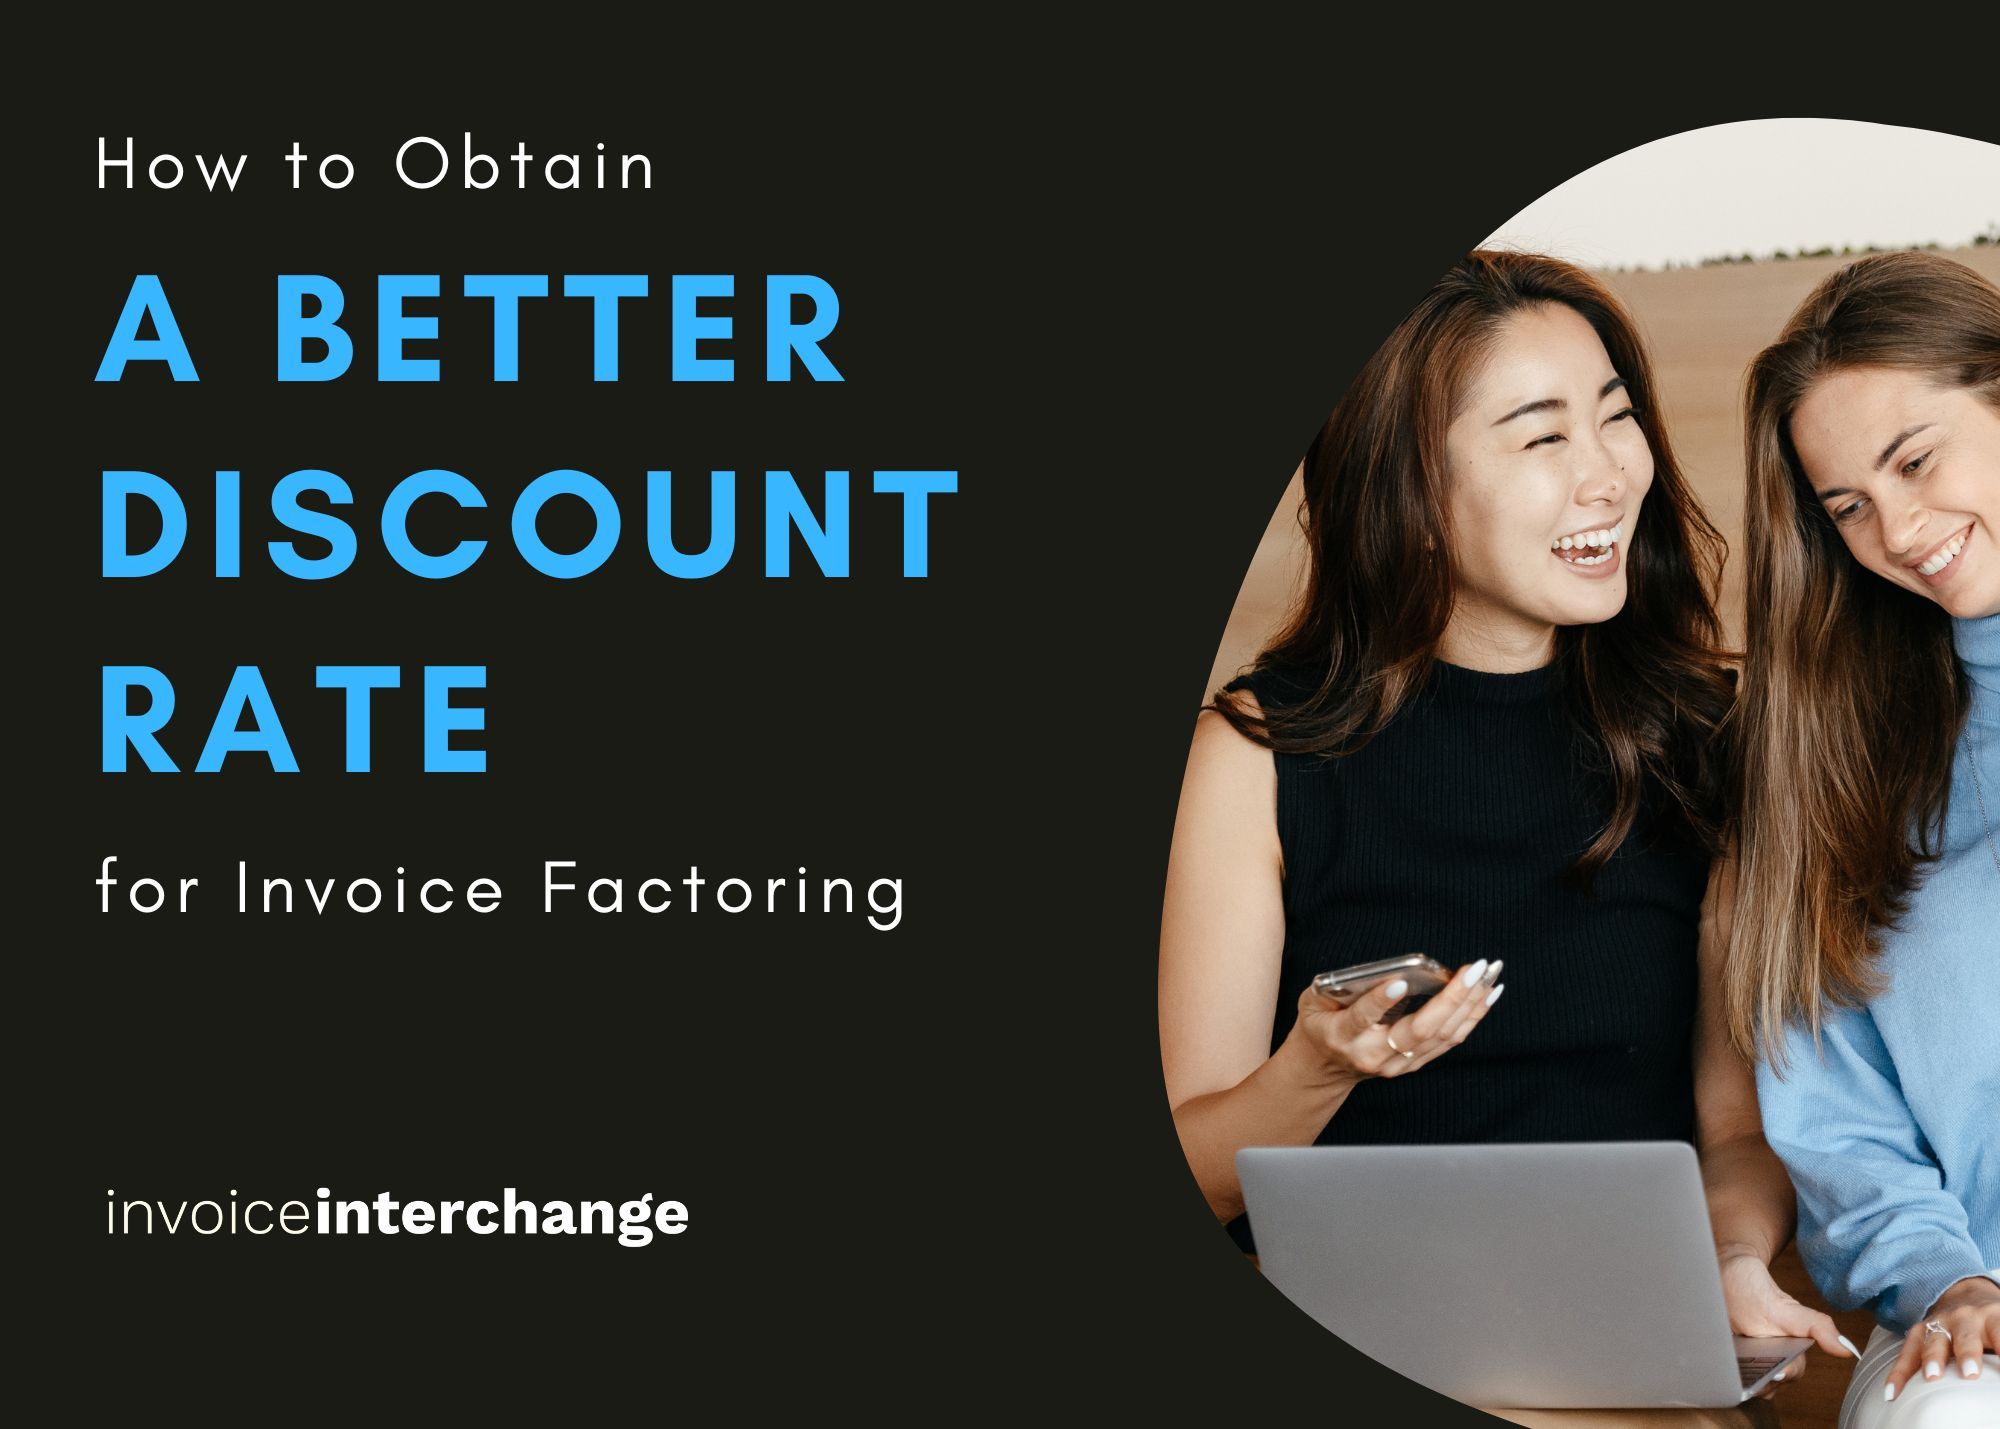 How to Obtain a Better Discount Rate for Invoice Factoring